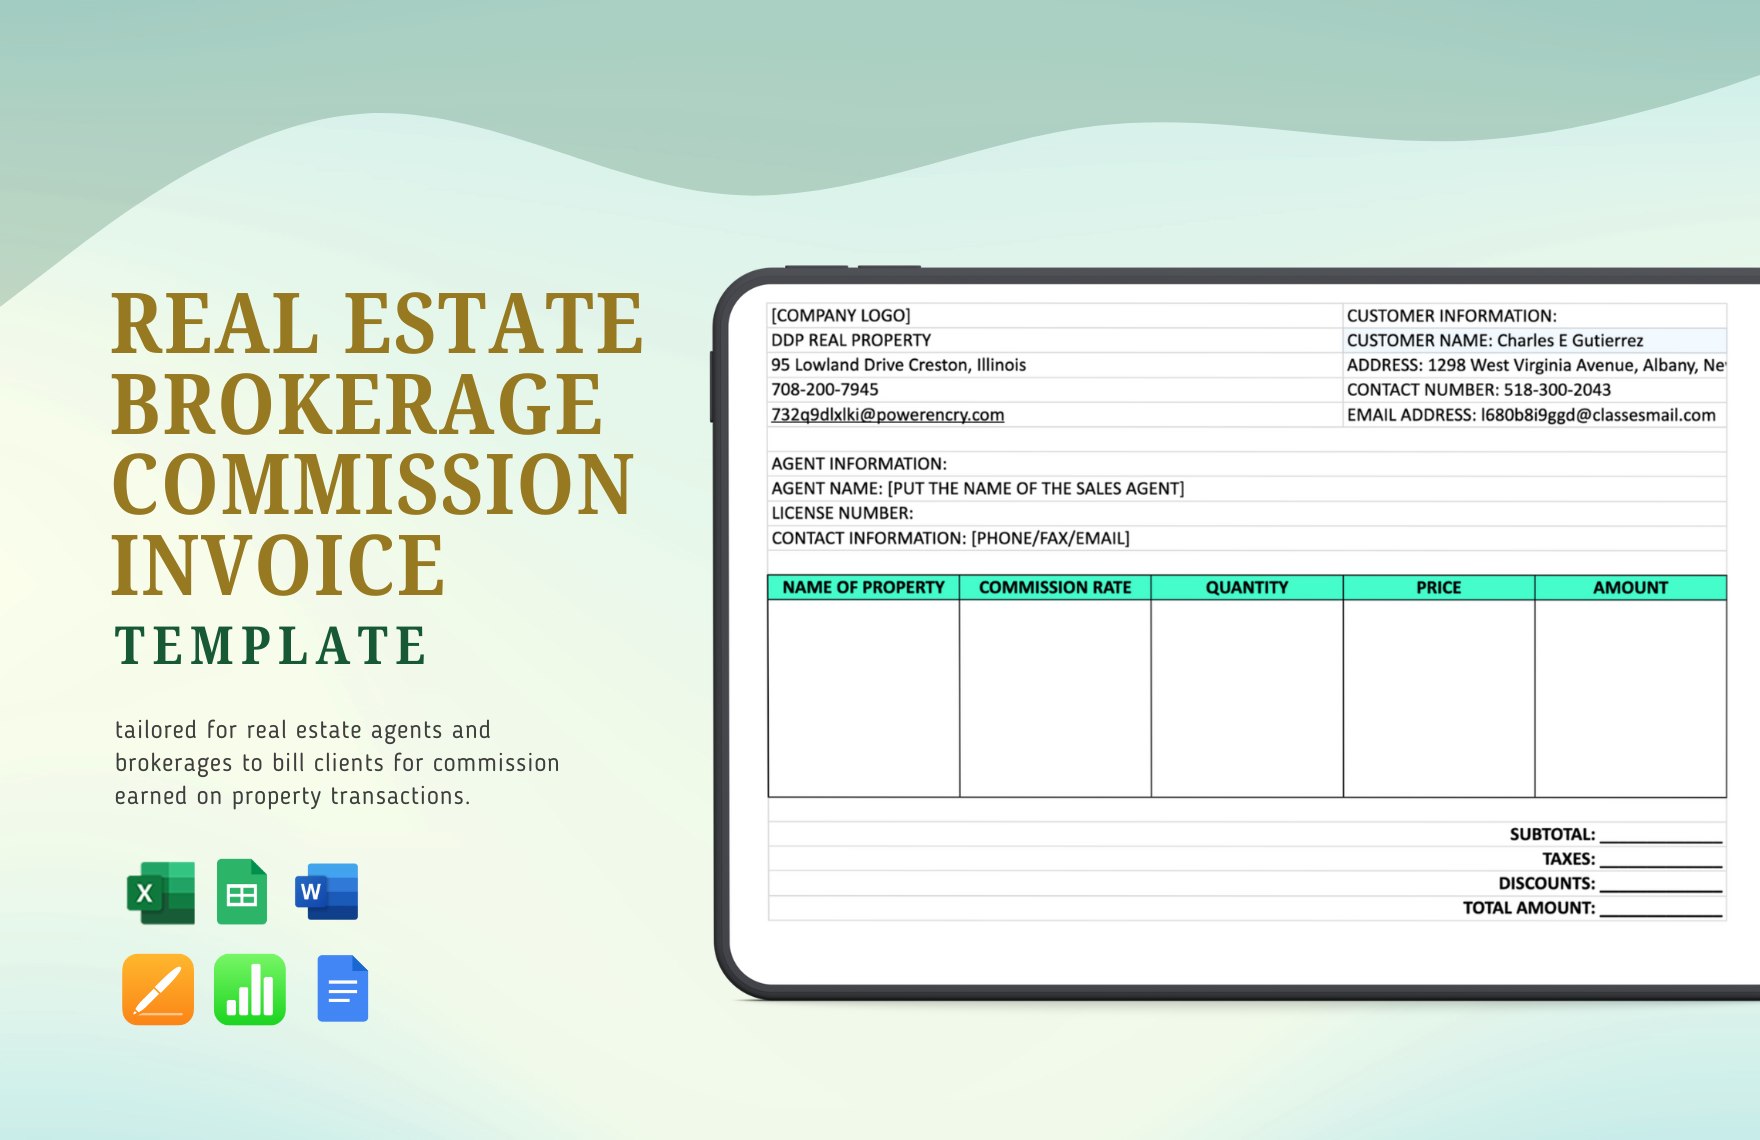 Real Estate Commission Invoice Template